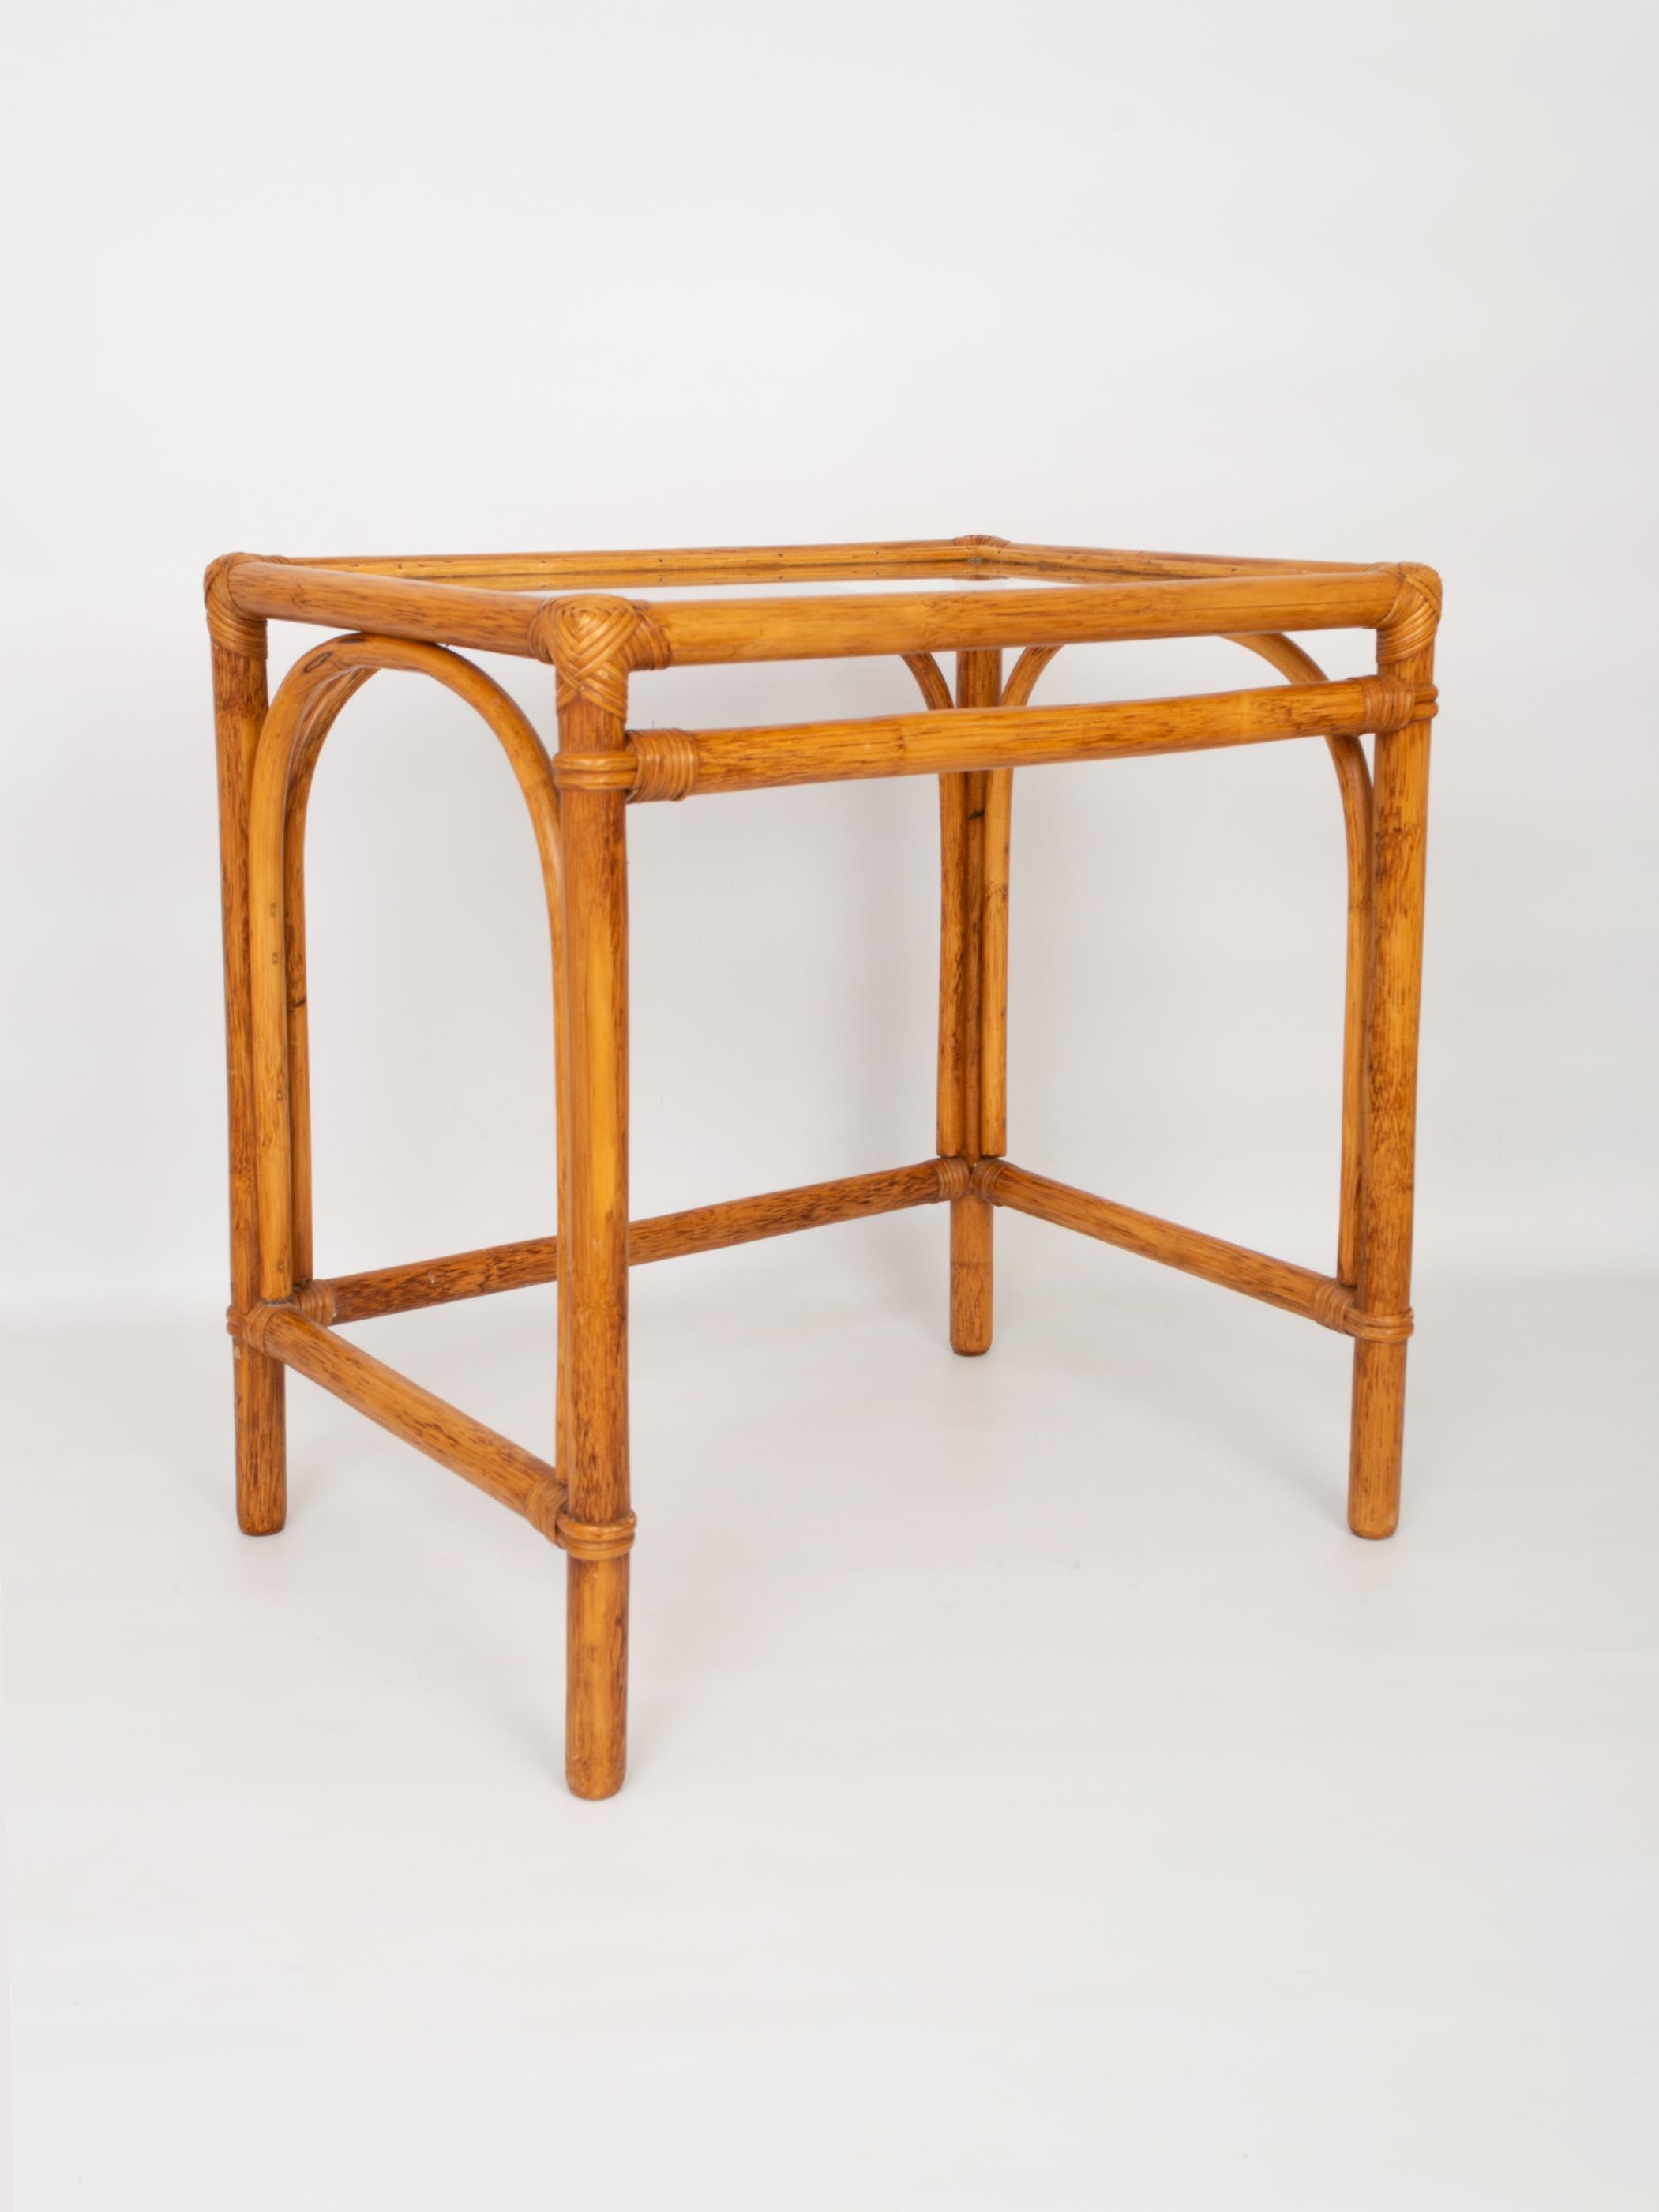 A mid century bamboo and rattan set of nesting tables, side end tables, Italy, C.1960.
With perspex table tops.
Presented in excellent vintage condition commensurate of age.

Measures: H: 60/50/39
W: 57/50/42
D: 43/37/32.